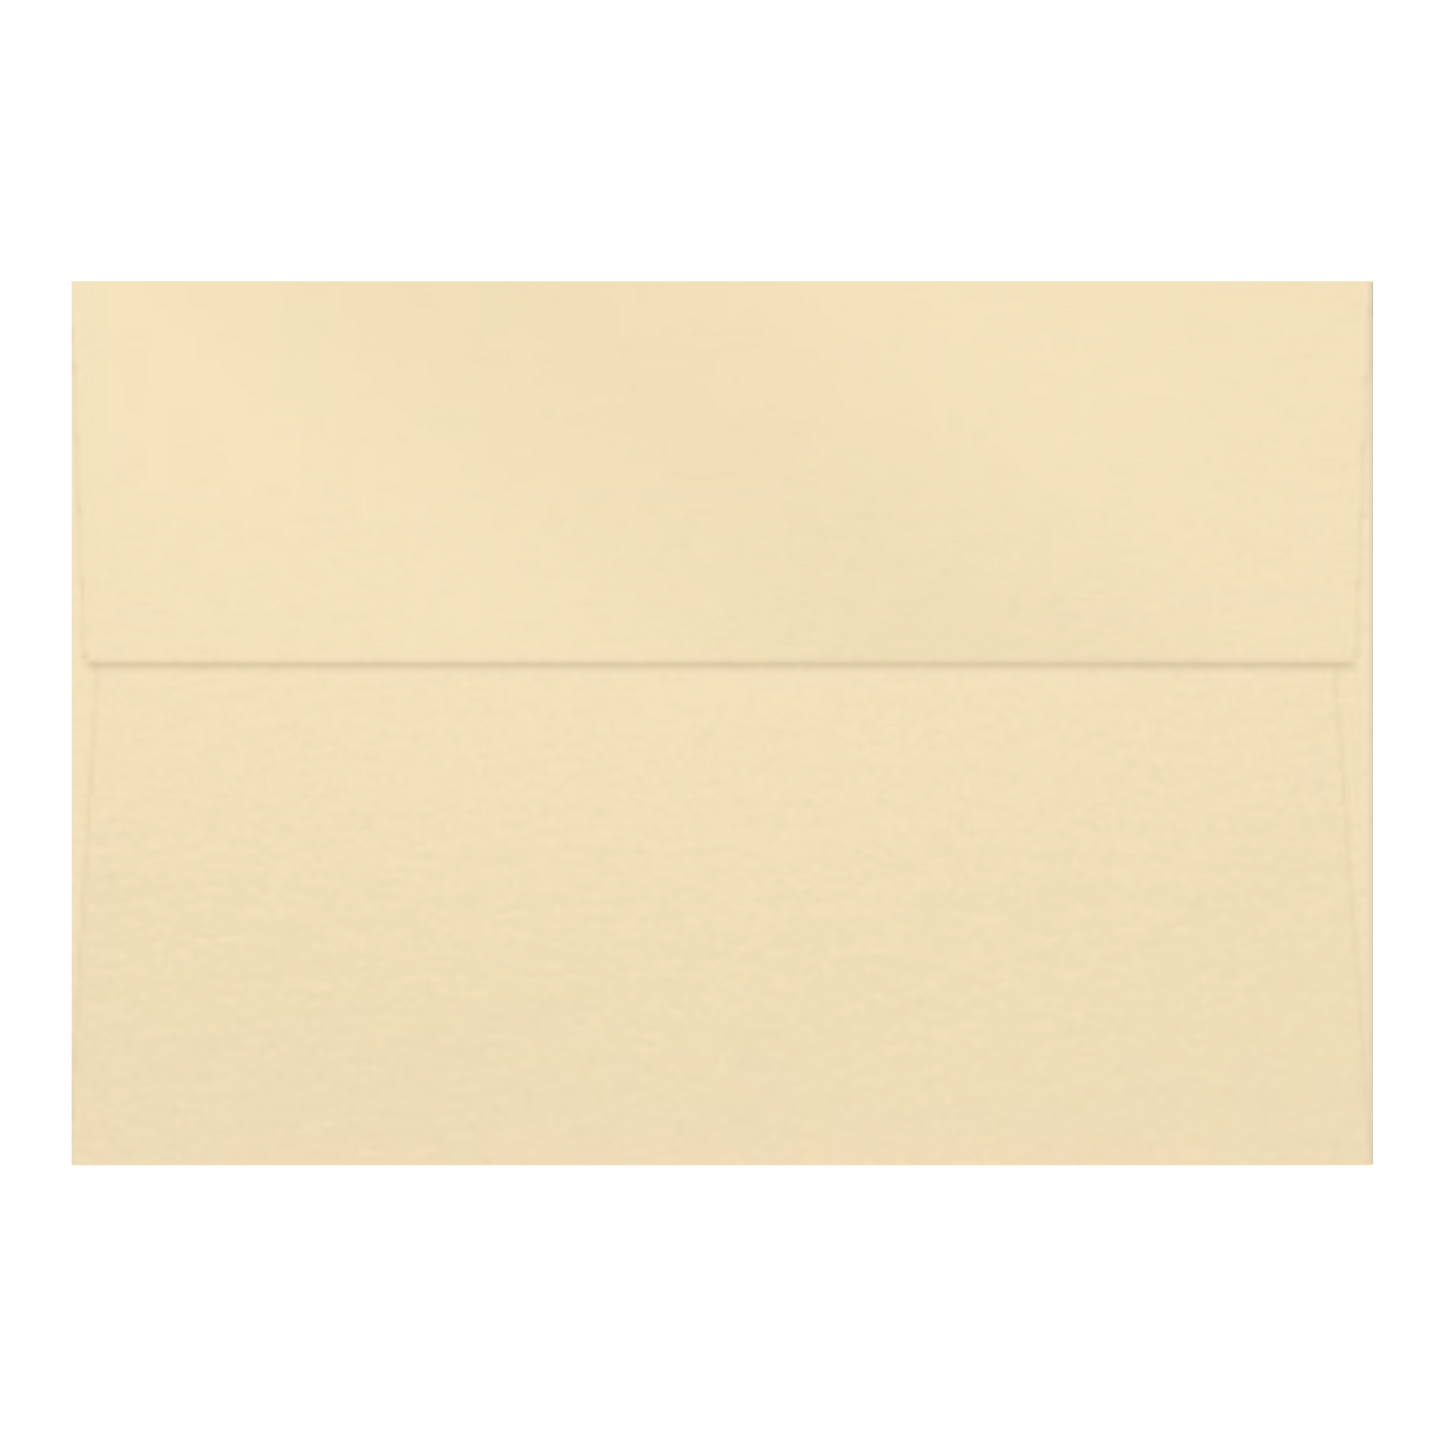 White Gold Metallic Envelope with a square flap